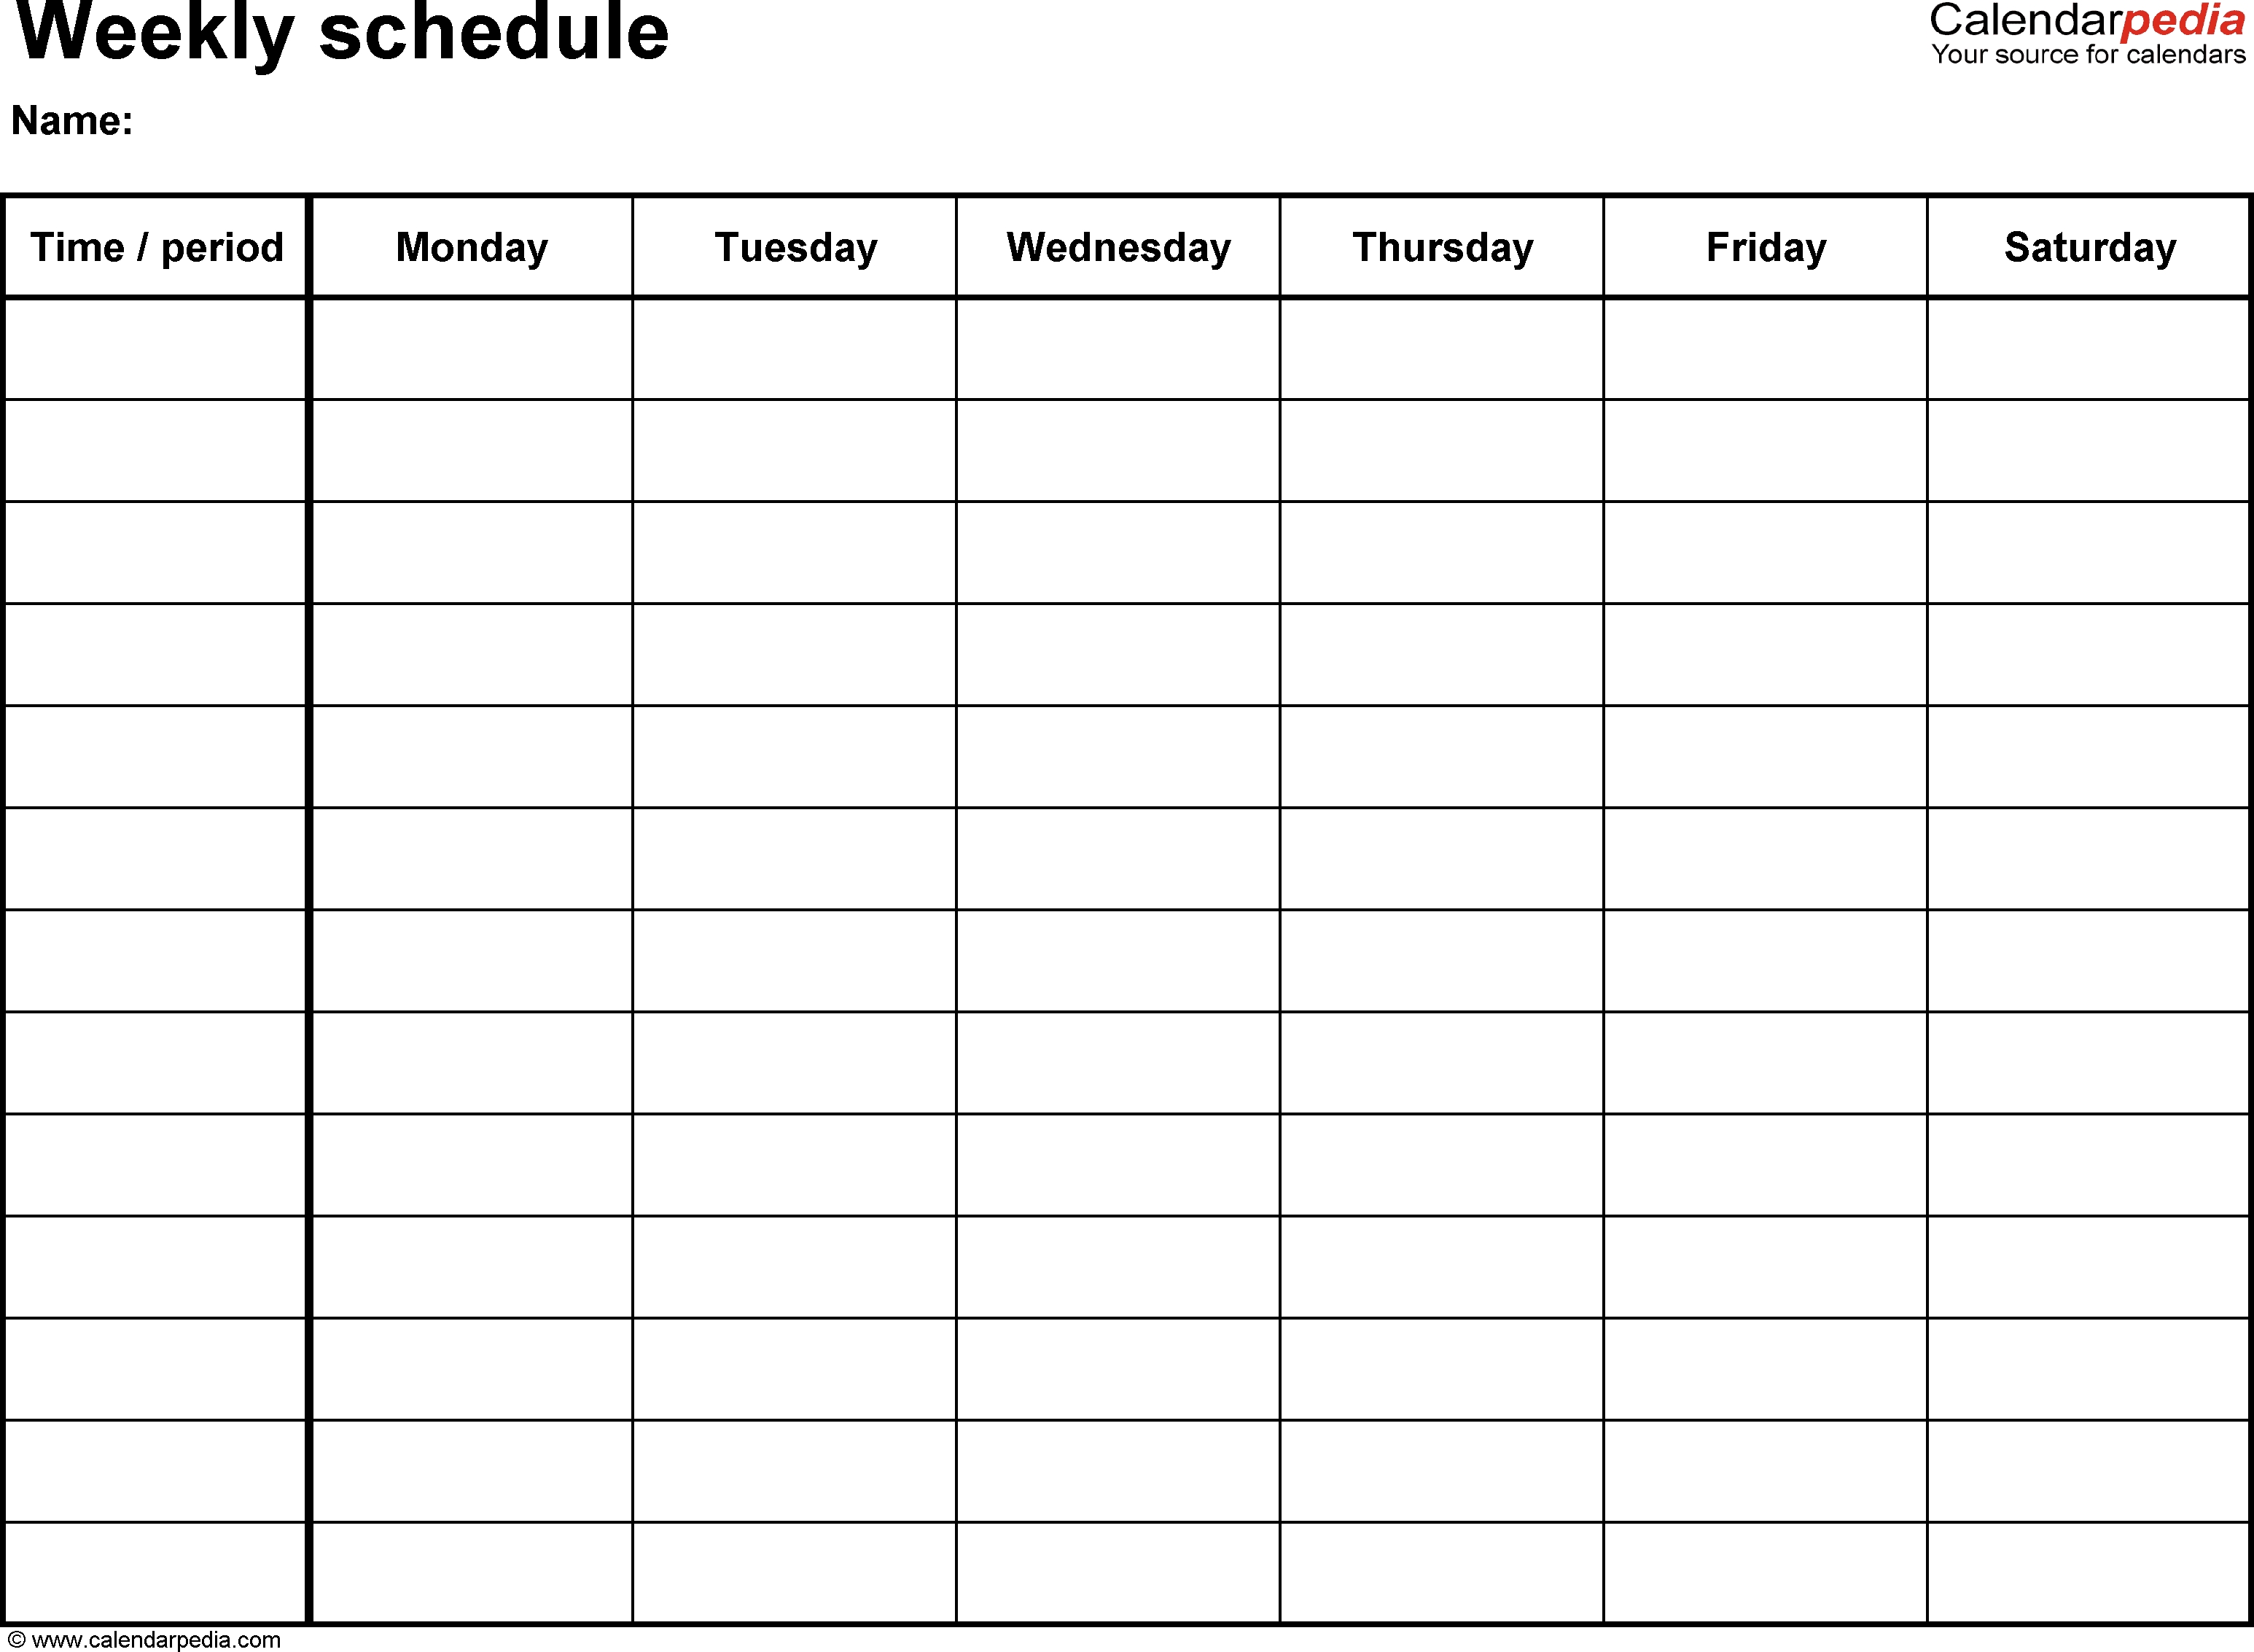 Free Weekly Schedule Templates For Word - 18 Templates 2 Week Calendar Template